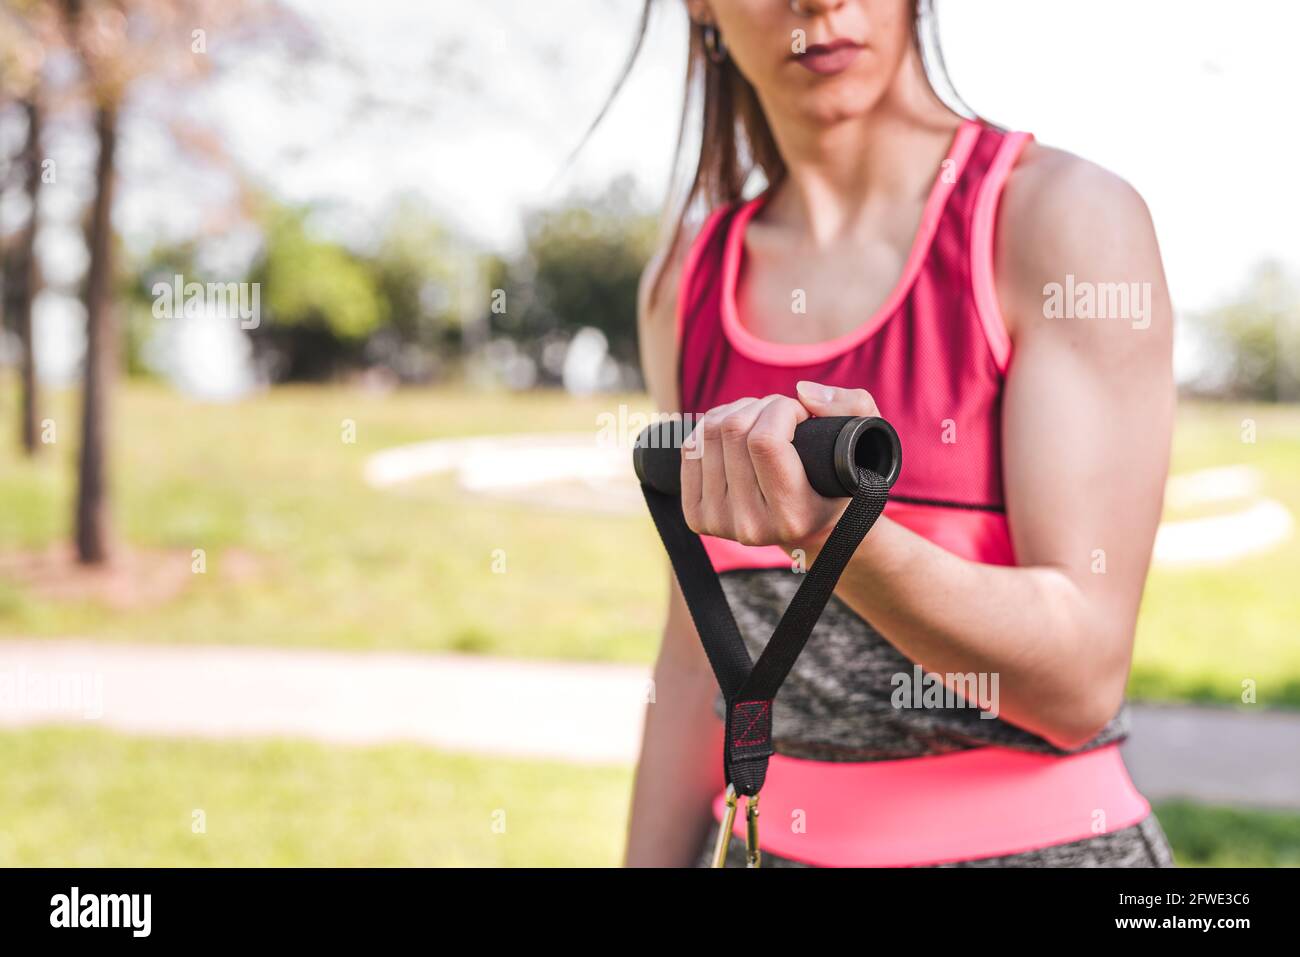 hands of a woman using resistance bands. She is unrecognizable. In a green park. Selective focus in hands Stock Photo